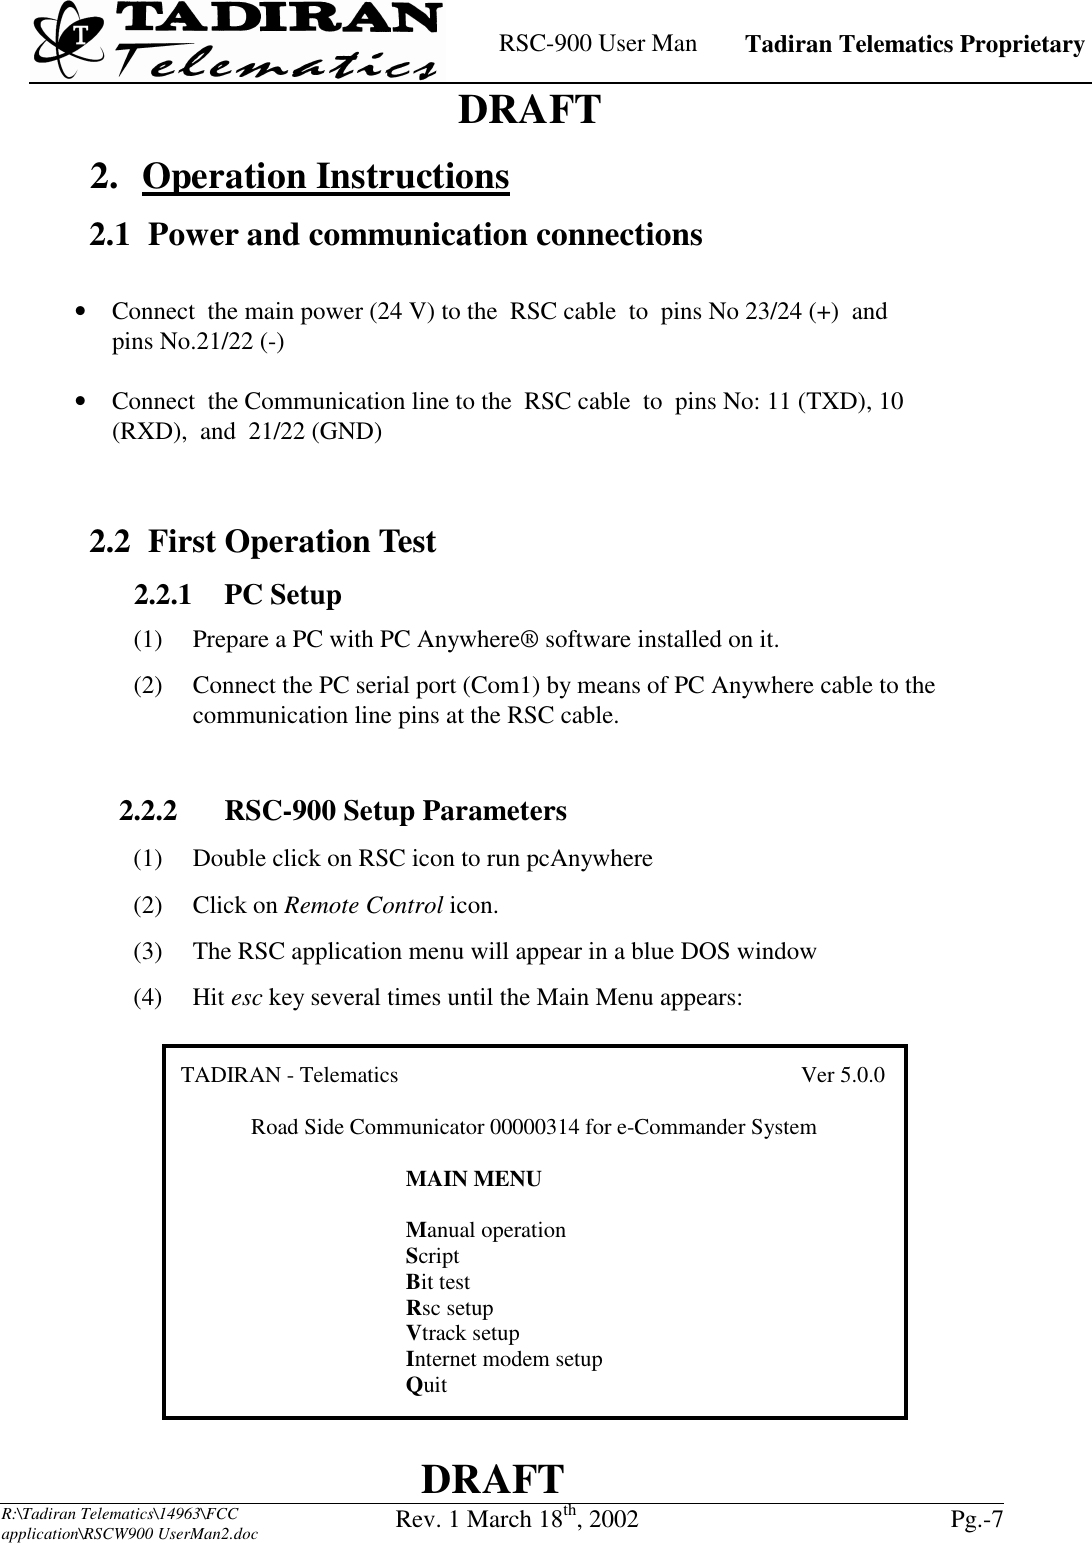    RSC-900 User Man   Tadiran Telematics Proprietary    DRAFT  DRAFT  R:\Tadiran Telematics\14963\FCC application\RSCW900 UserMan2.doc Rev. 1 March 18th, 2002  Pg.-7   2. Operation Instructions 2.1  Power and communication connections  •  Connect  the main power (24 V) to the  RSC cable  to  pins No 23/24 (+)  and  pins No.21/22 (-)  •  Connect  the Communication line to the  RSC cable  to  pins No: 11 (TXD), 10 (RXD),  and  21/22 (GND)   2.2 First Operation Test 2.2.1   PC  Setup (1)  Prepare a PC with PC Anywhere® software installed on it. (2)  Connect the PC serial port (Com1) by means of PC Anywhere cable to the communication line pins at the RSC cable.  2.2.2    RSC-900 Setup Parameters (1)  Double click on RSC icon to run pcAnywhere (2) Click on Remote Control icon. (3)  The RSC application menu will appear in a blue DOS window (4) Hit esc key several times until the Main Menu appears: TADIRAN - Telematics                                        Ver 5.0.0Road Side Communicator 00000314 for e-Commander SystemMAIN MENUManual operationScriptBit testRsc setupVtrack setupInternet modem setupQuit